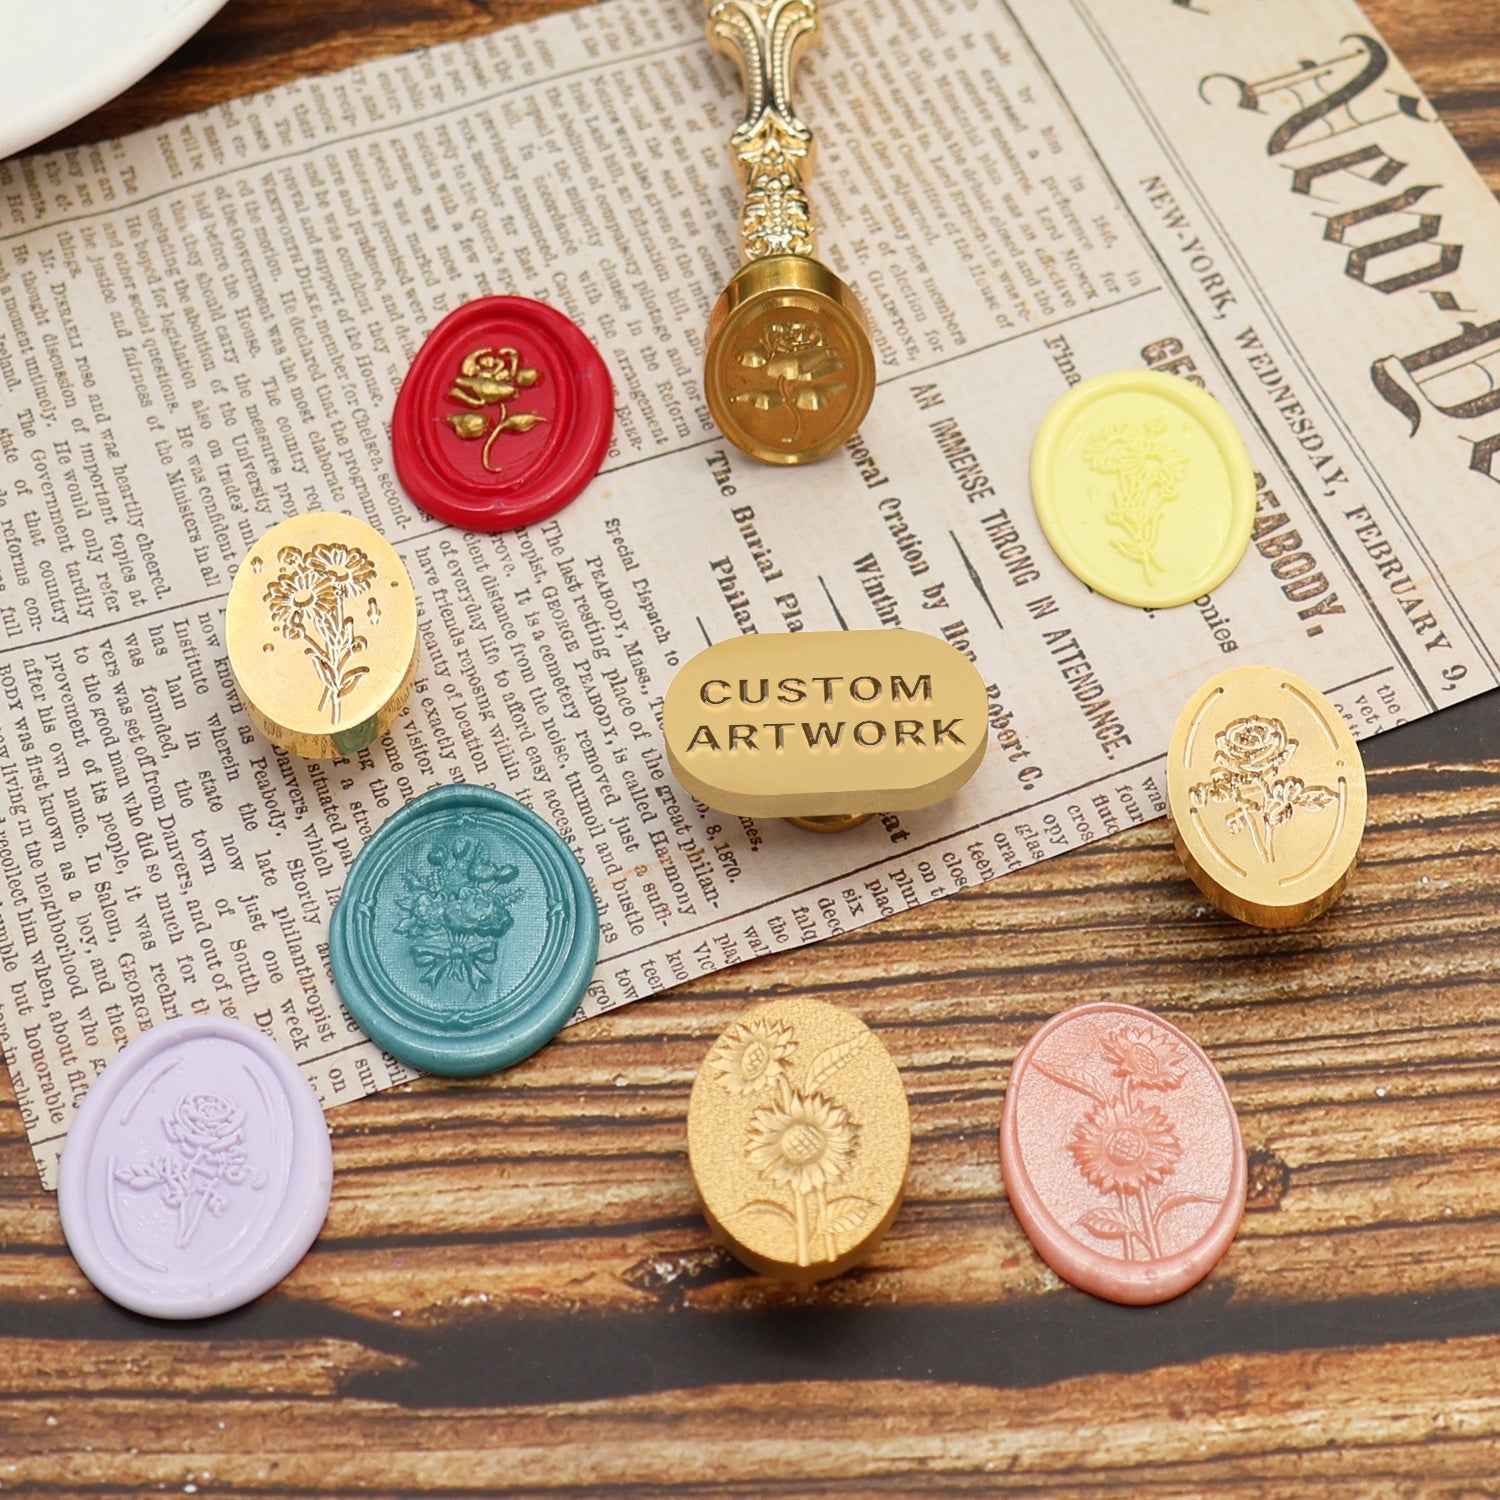 Personalized Wax Seal Stamp/Custom Wax Seal Stamp/ Make Your Own Design and Logo  stamp - AliExpress